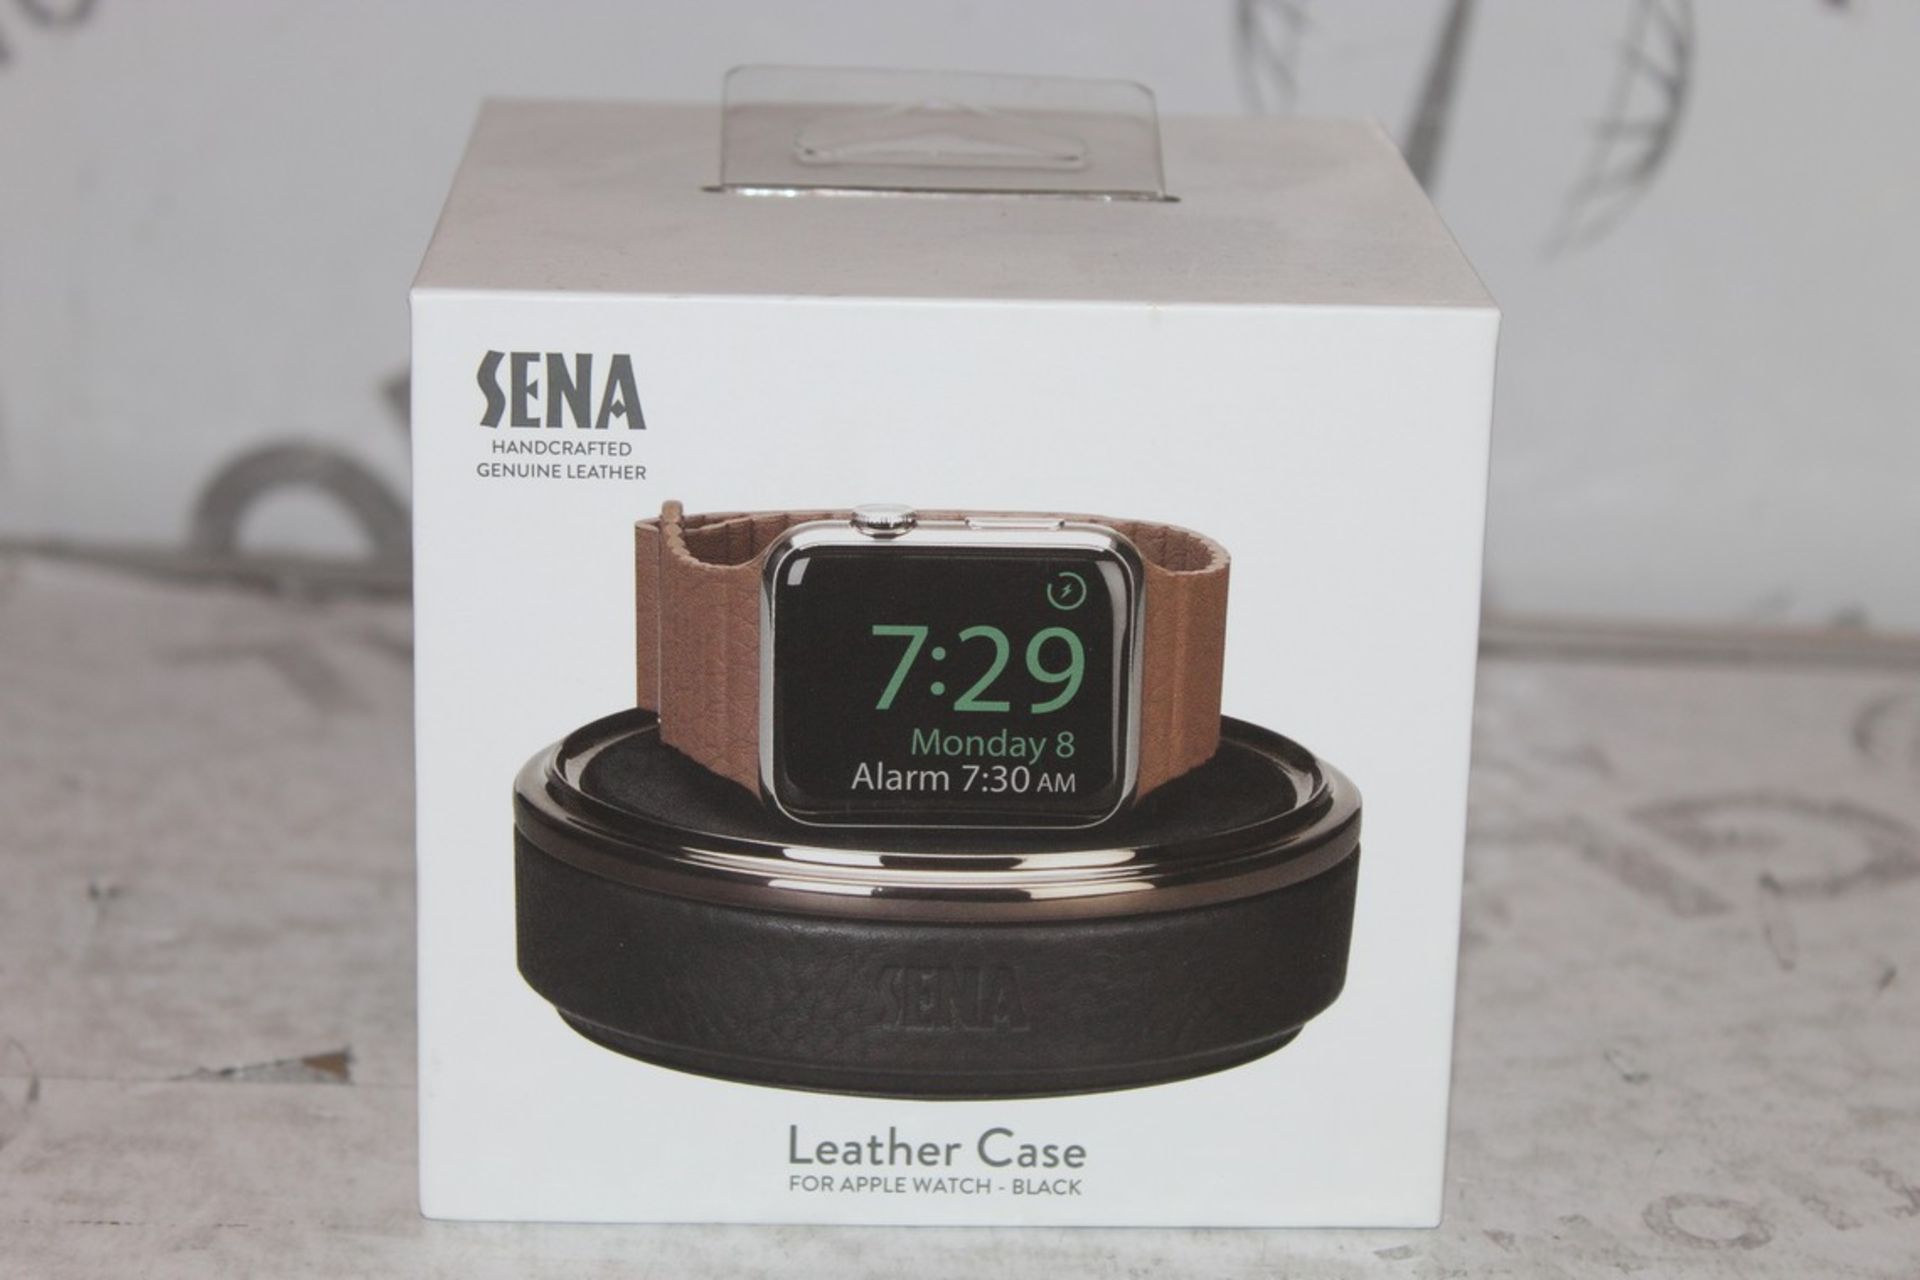 Lot to Contain 12 Boxed Sena Hand Crafted Genuine Leather Black Apple Watch Cases Combined RRP £480